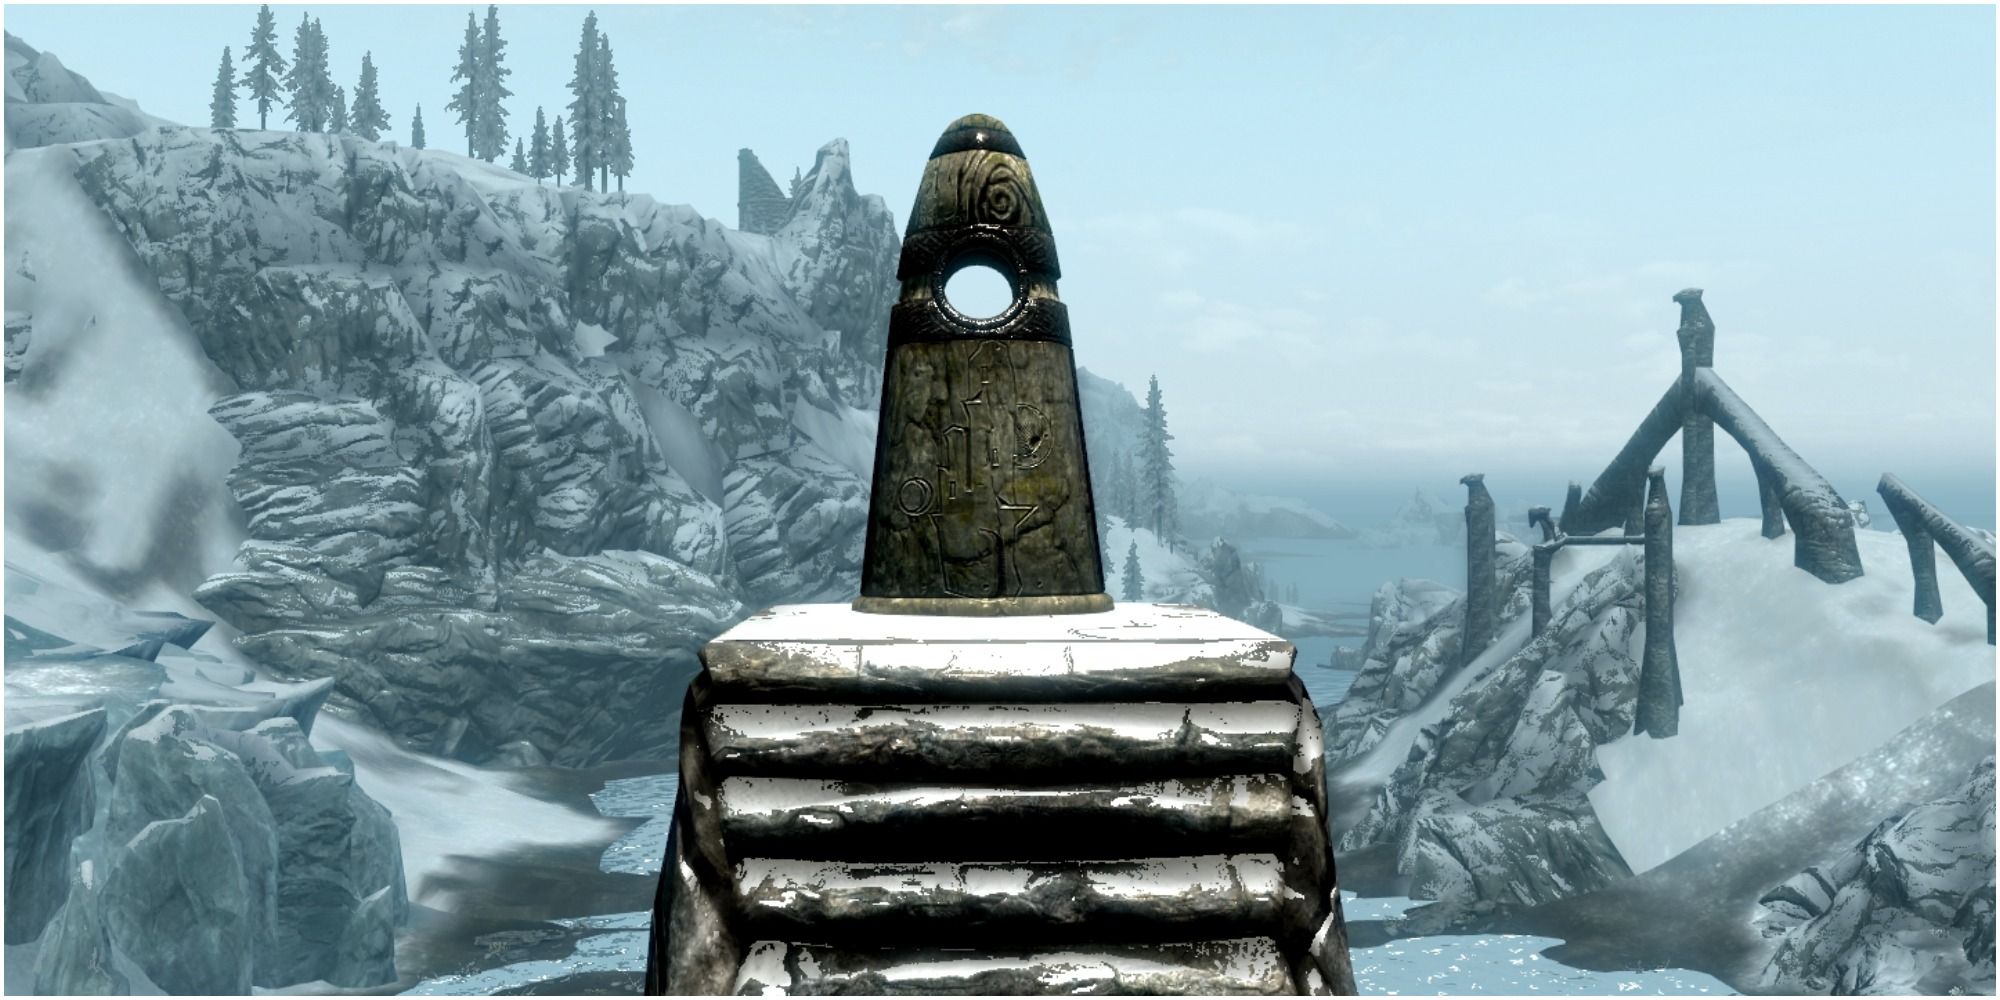 The Tower Standing Stone of Skyrim